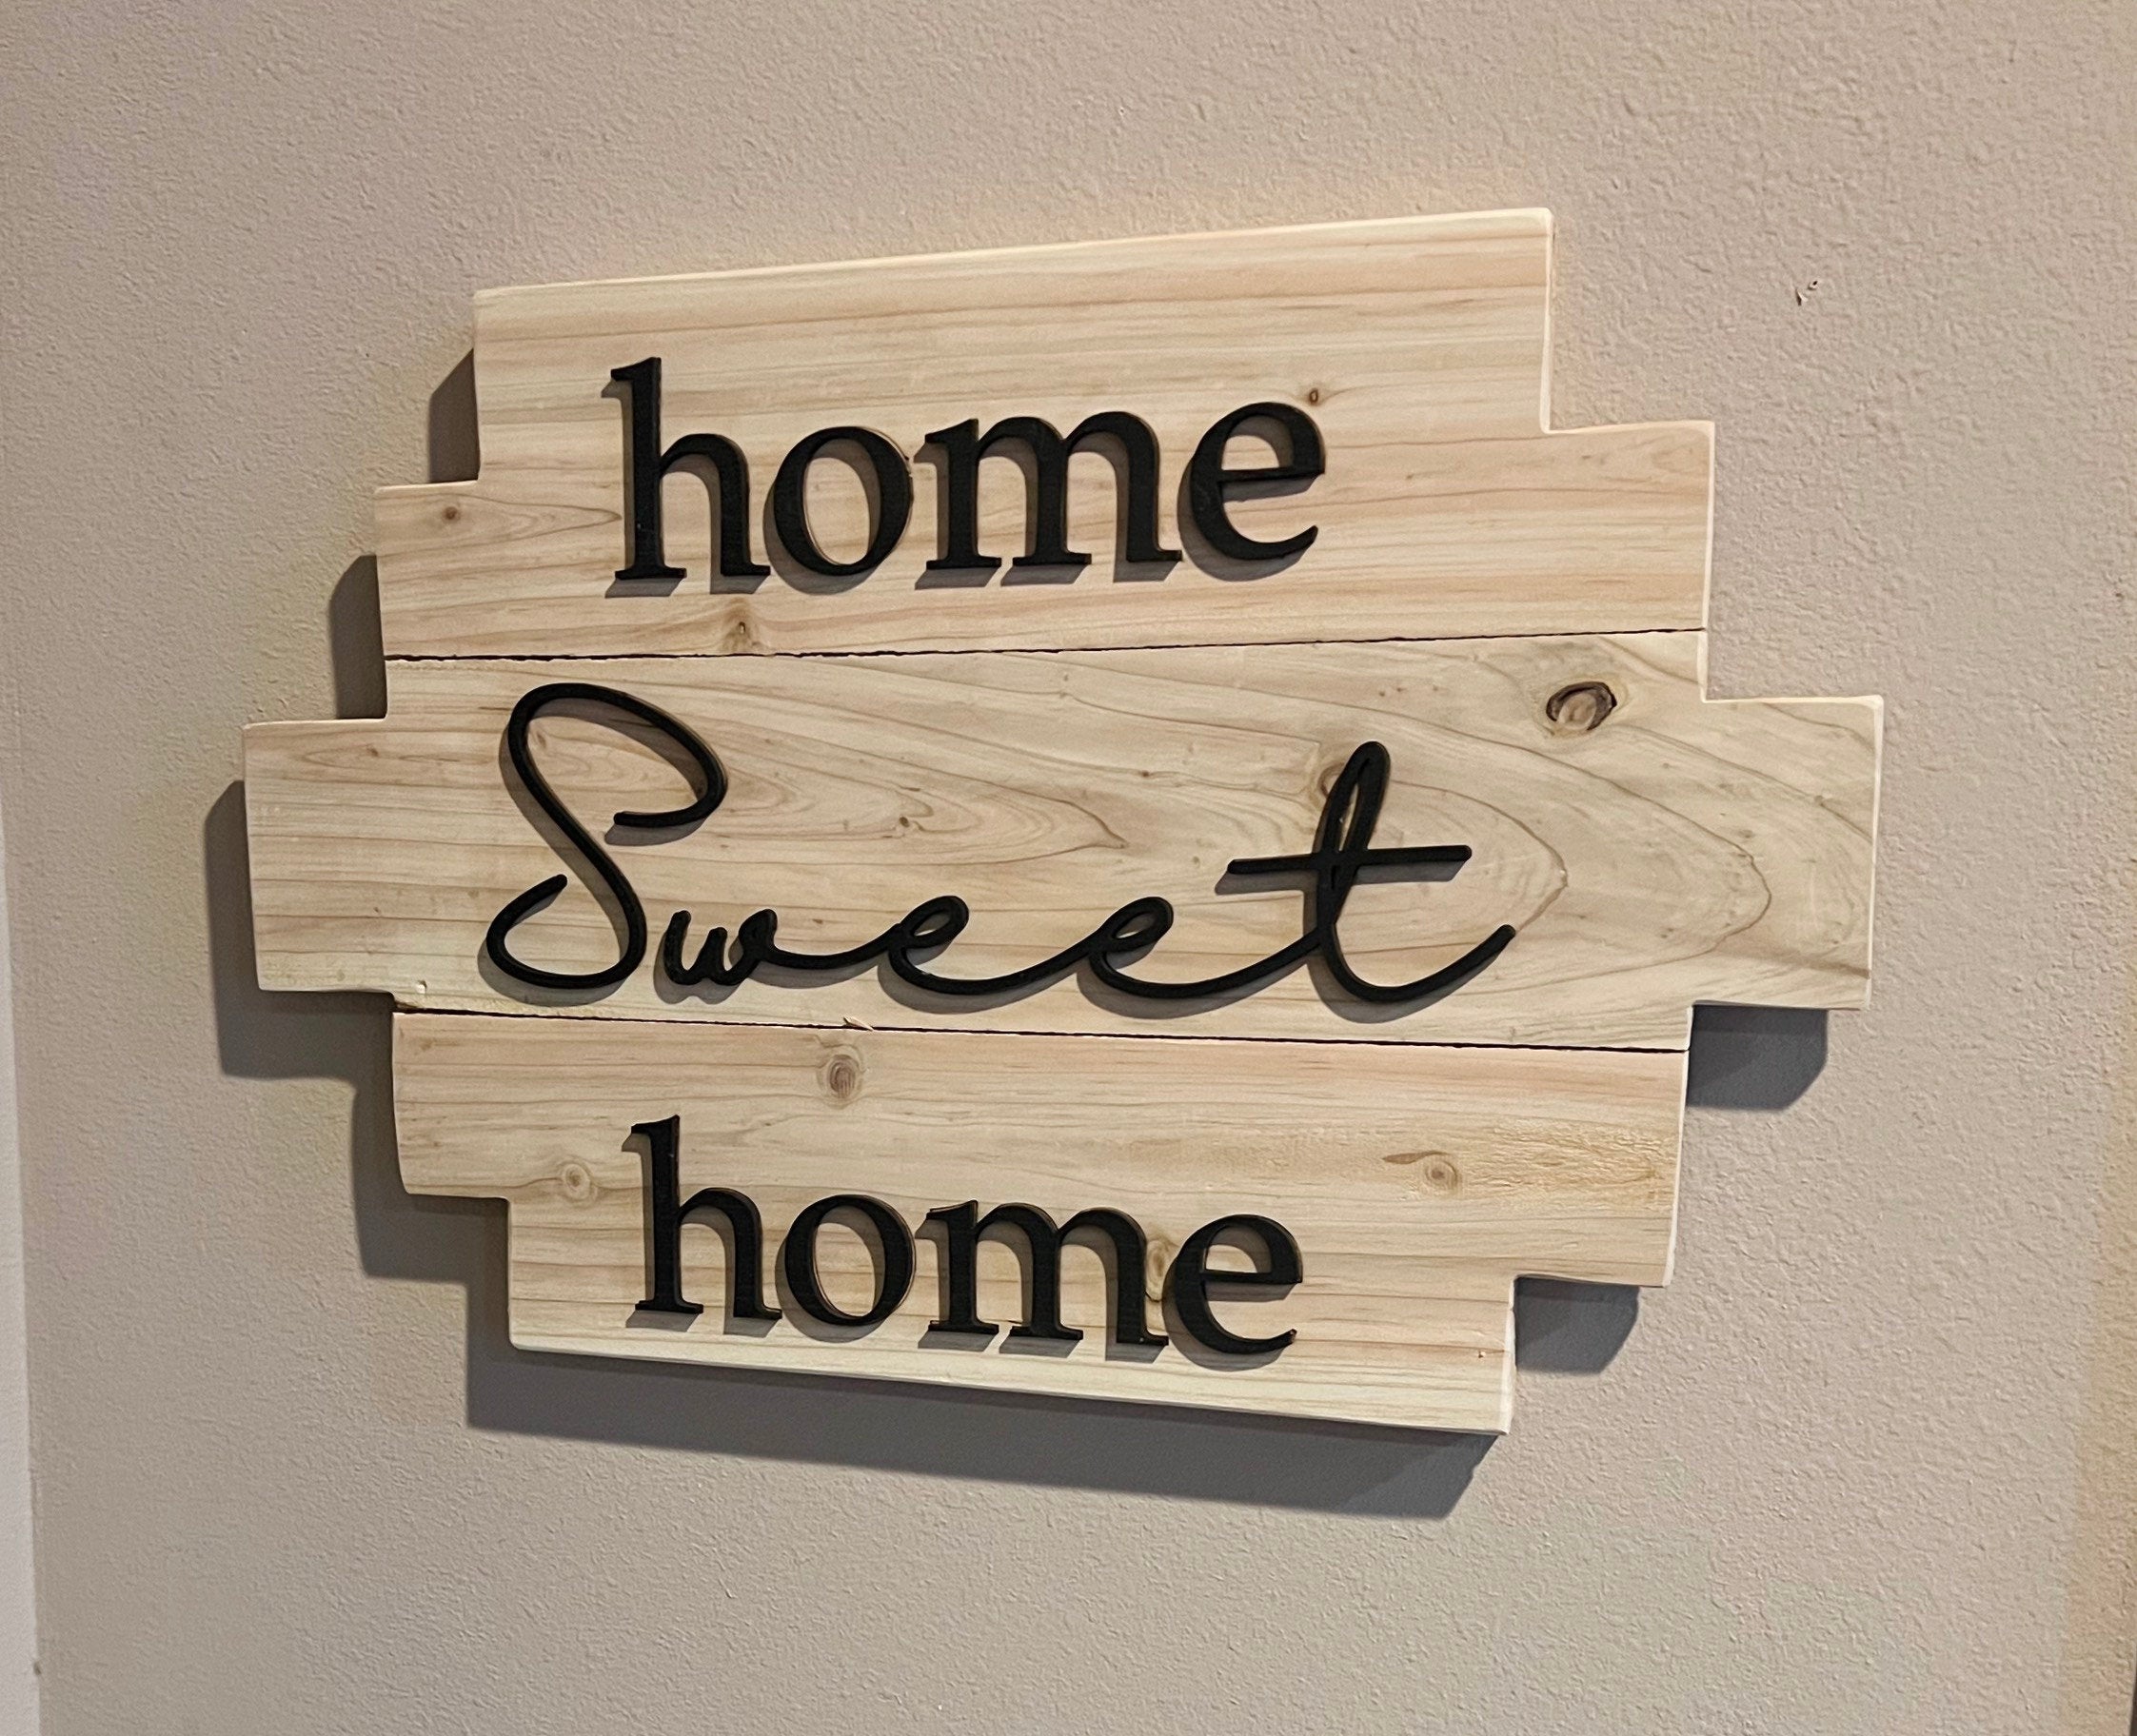 Home Sweet Home Sign, Our first home Sign, New Home Sign, Housewarming Gift, Personalized Home Decor, Wood Signs, Rustic Signs, Wall Decor